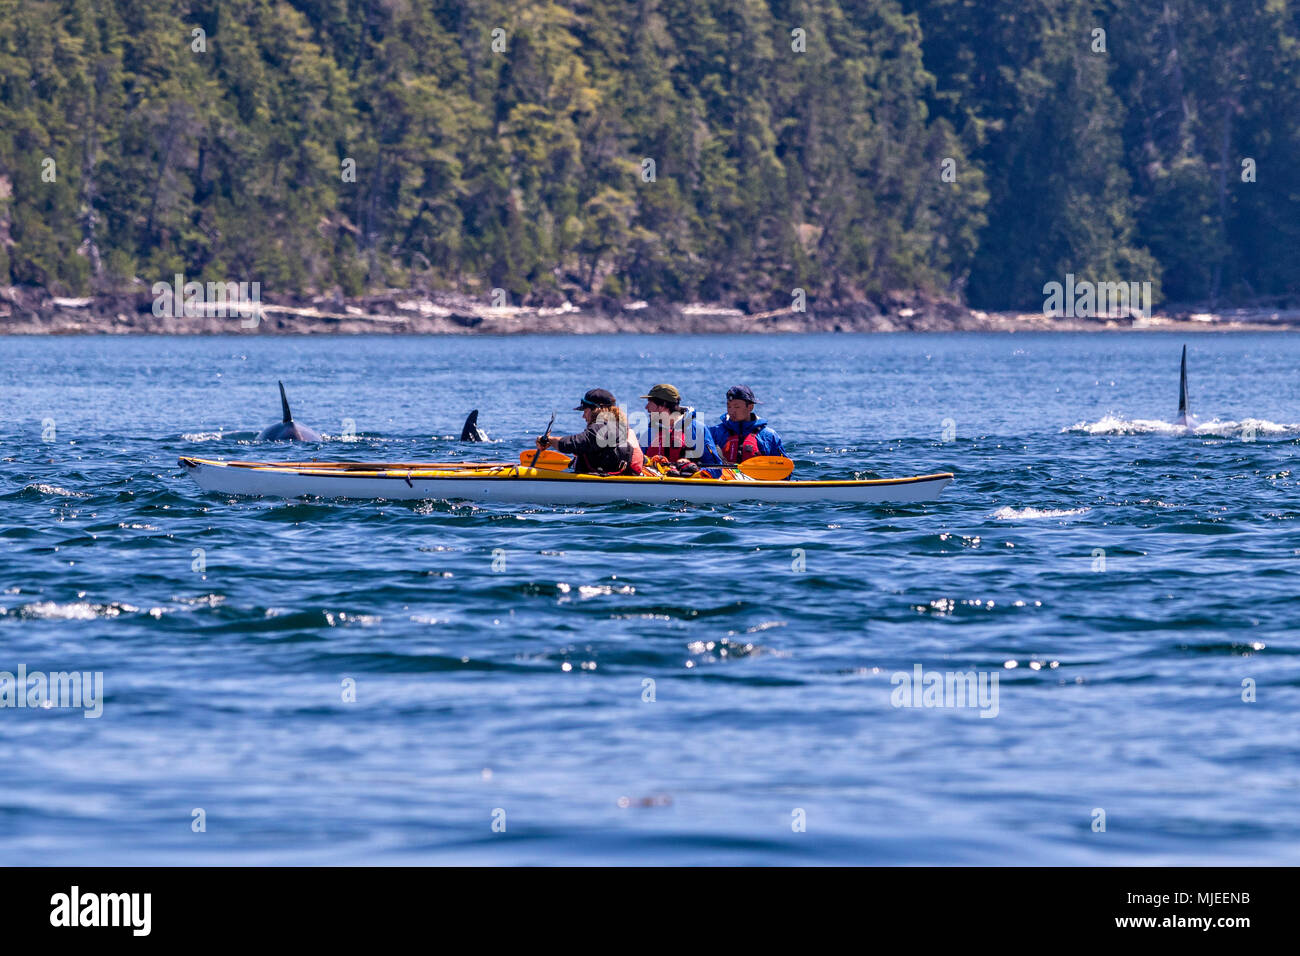 Killer whales and kayakers in Johnstone Strait, off Vancouver Island, British Columbia, Canada. Stock Photo